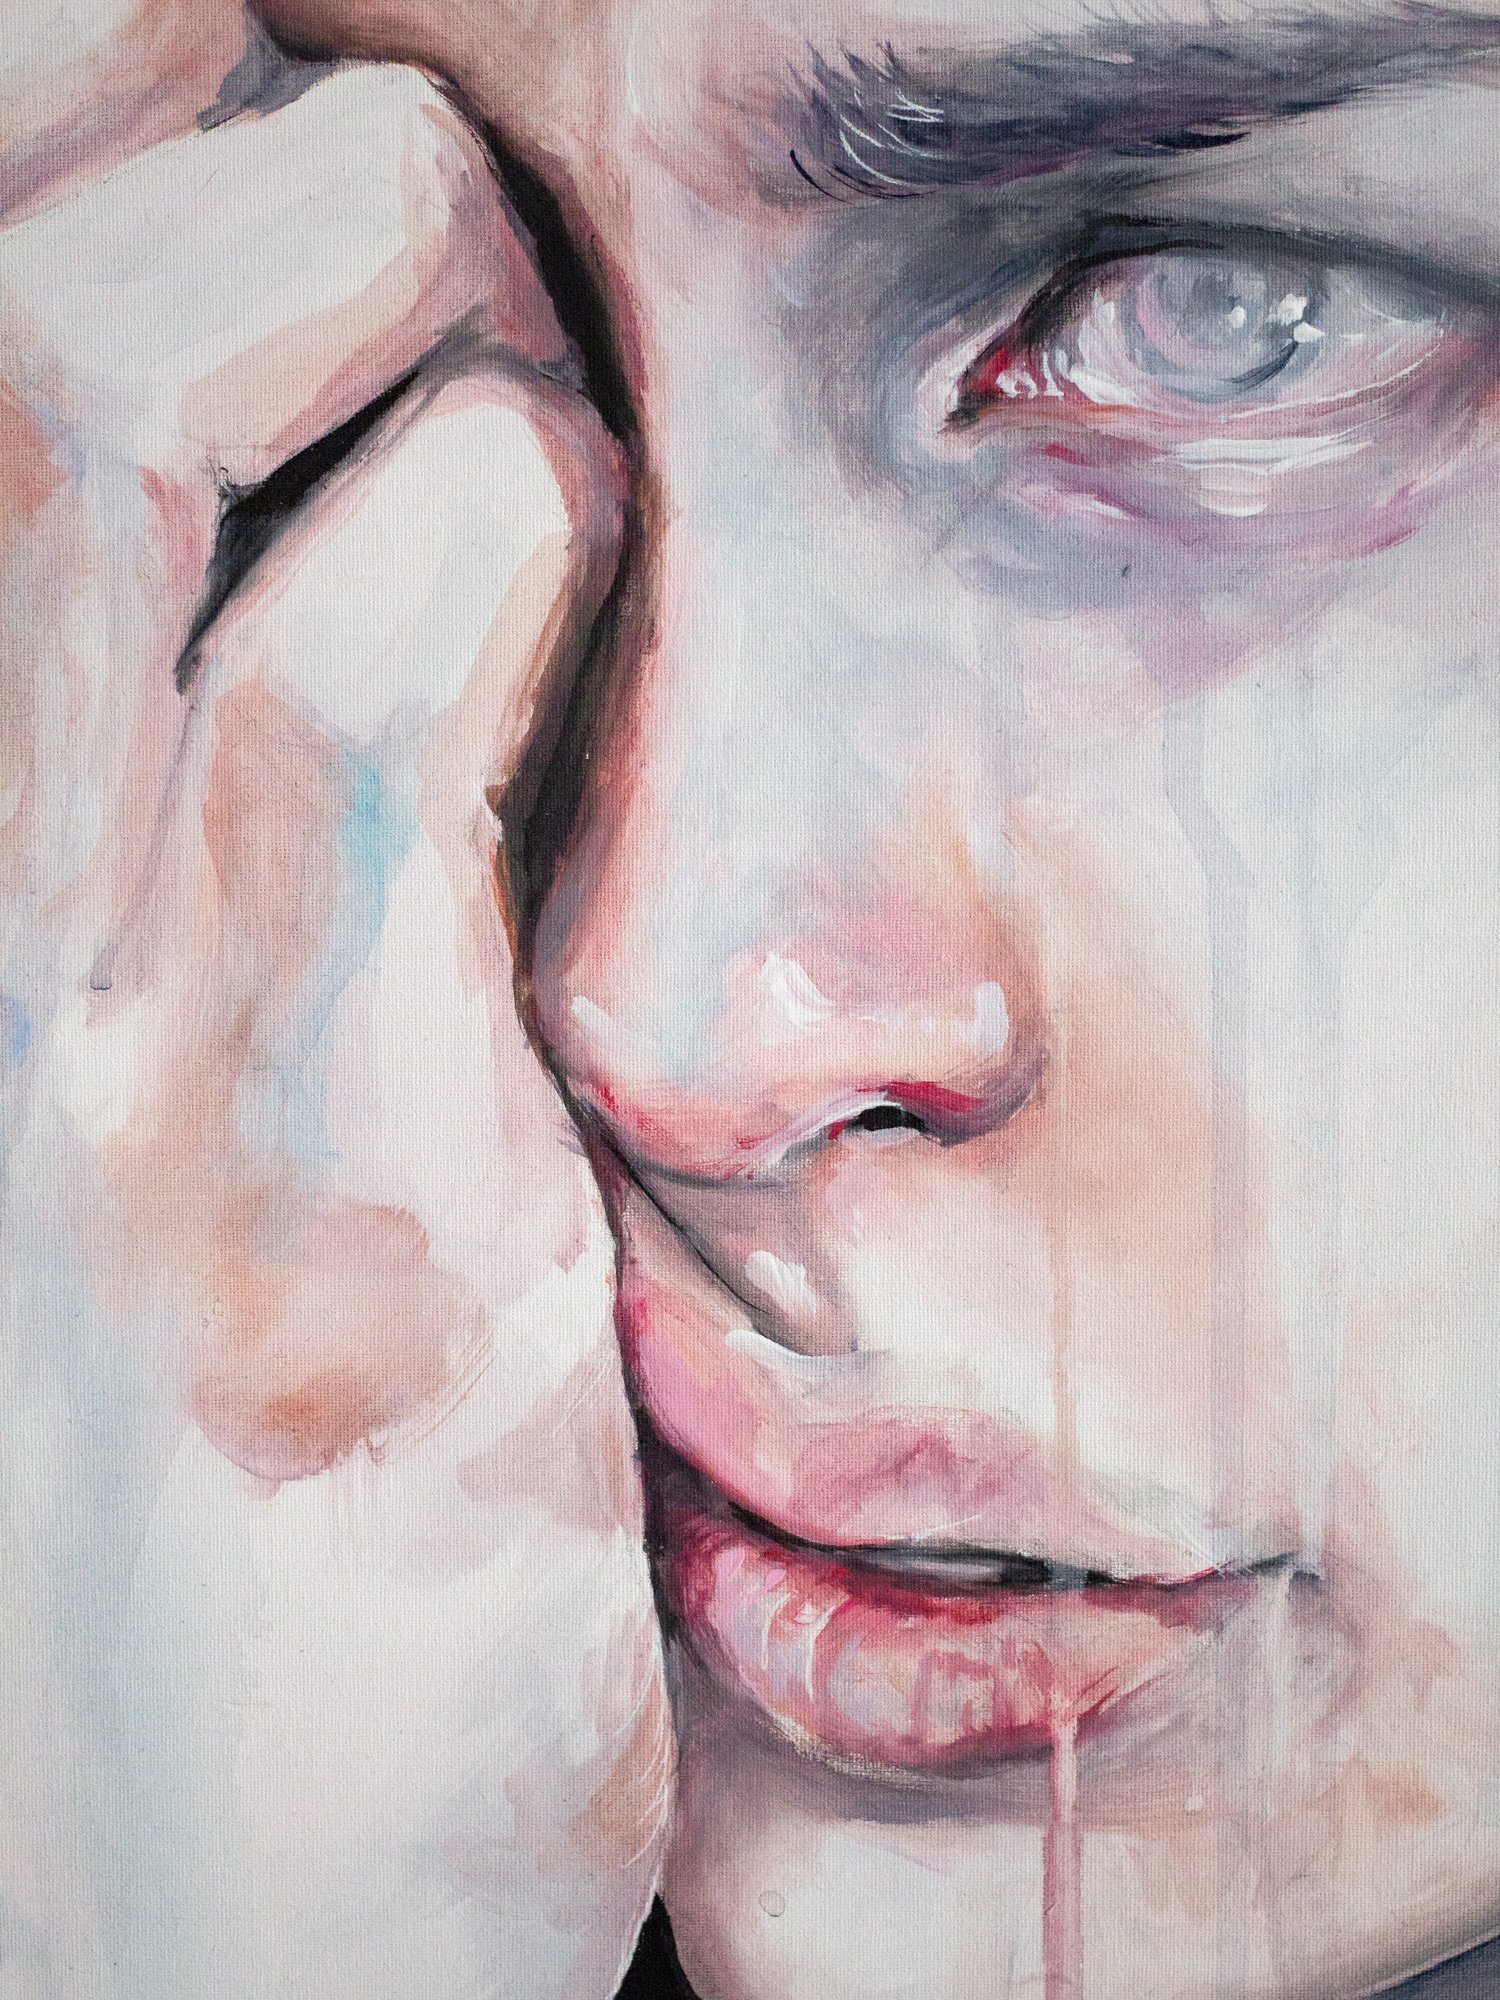 Agnes-Cecile I could but I can't